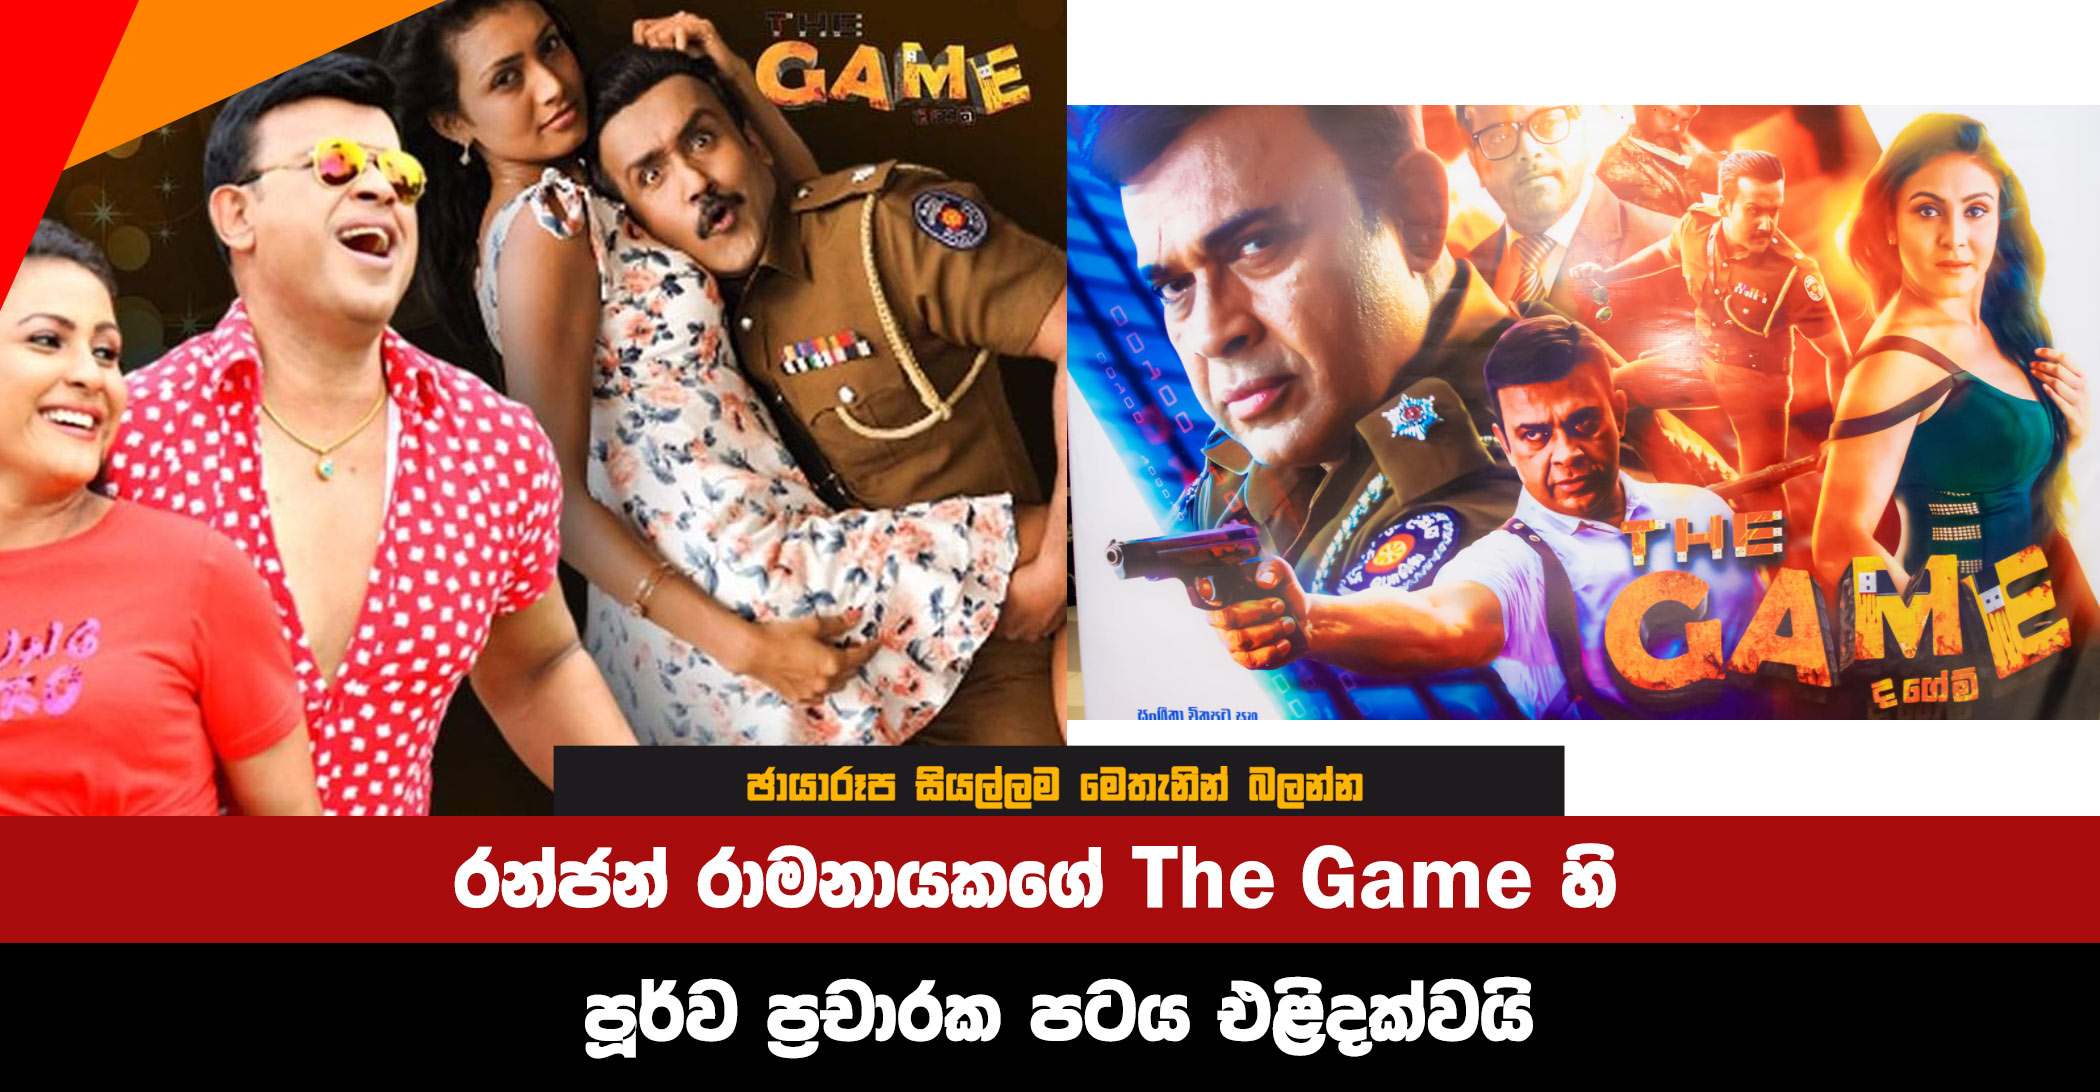 Ranjan Ramanayake's previous trailer for The Game is released